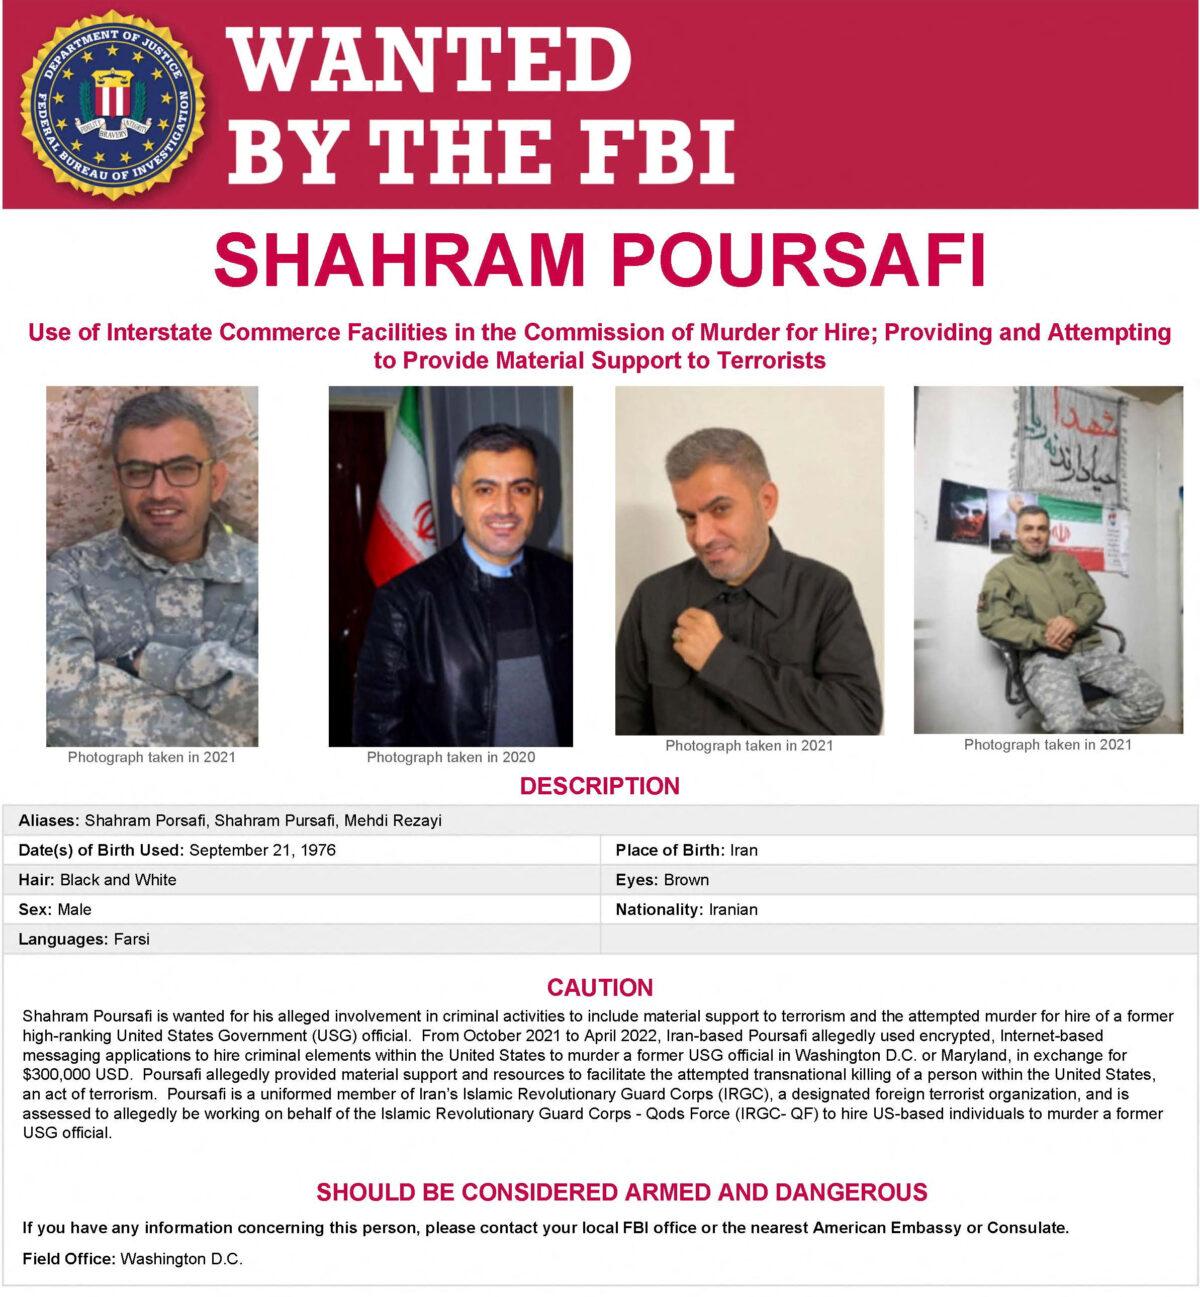 An FBI wanted poster shows Shahram Poursafi, also known as Mehdi Rezayi, of Tehran, Iran, in an image released on Aug. 10, 2022. (Federal Bureau of Investigation/Handout via Reuters)